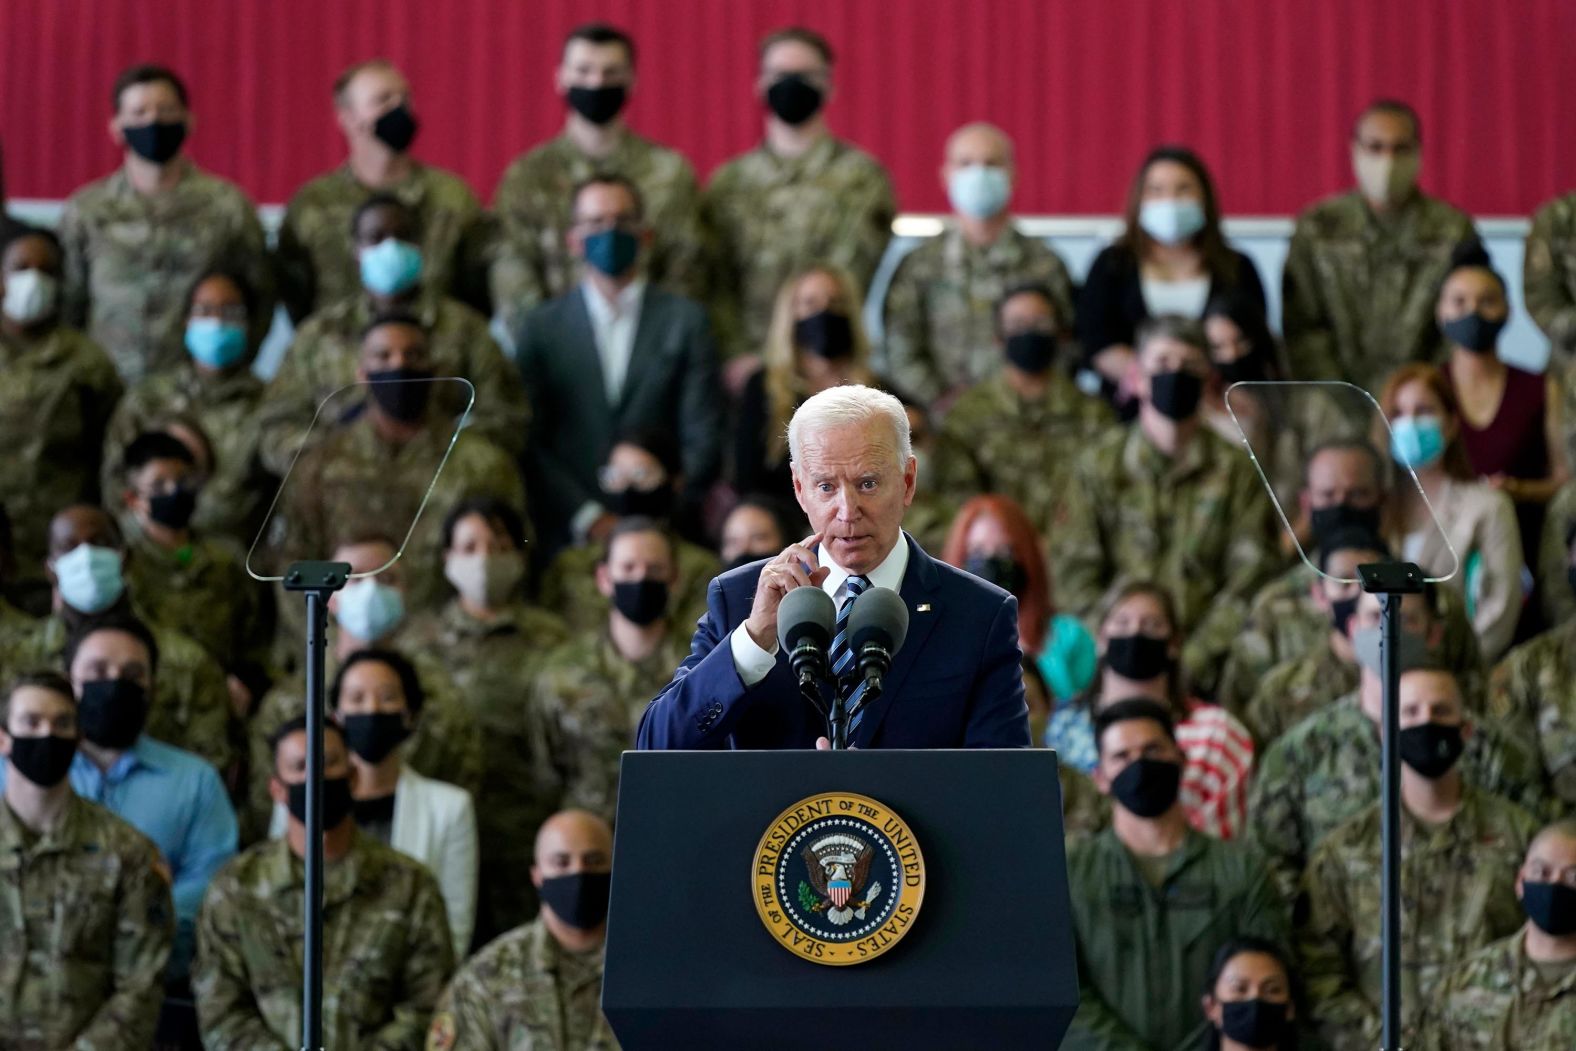 Biden speaks to American service members in Suffolk, England, at the beginning of his trip. <a href="index.php?page=&url=https%3A%2F%2Fwww.cnn.com%2F2021%2F06%2F09%2Fpolitics%2Fjoe-biden-troops-europe-trip%2Findex.html" target="_blank">He told the troops</a> that he was in Europe to defend the very concept of democracy.